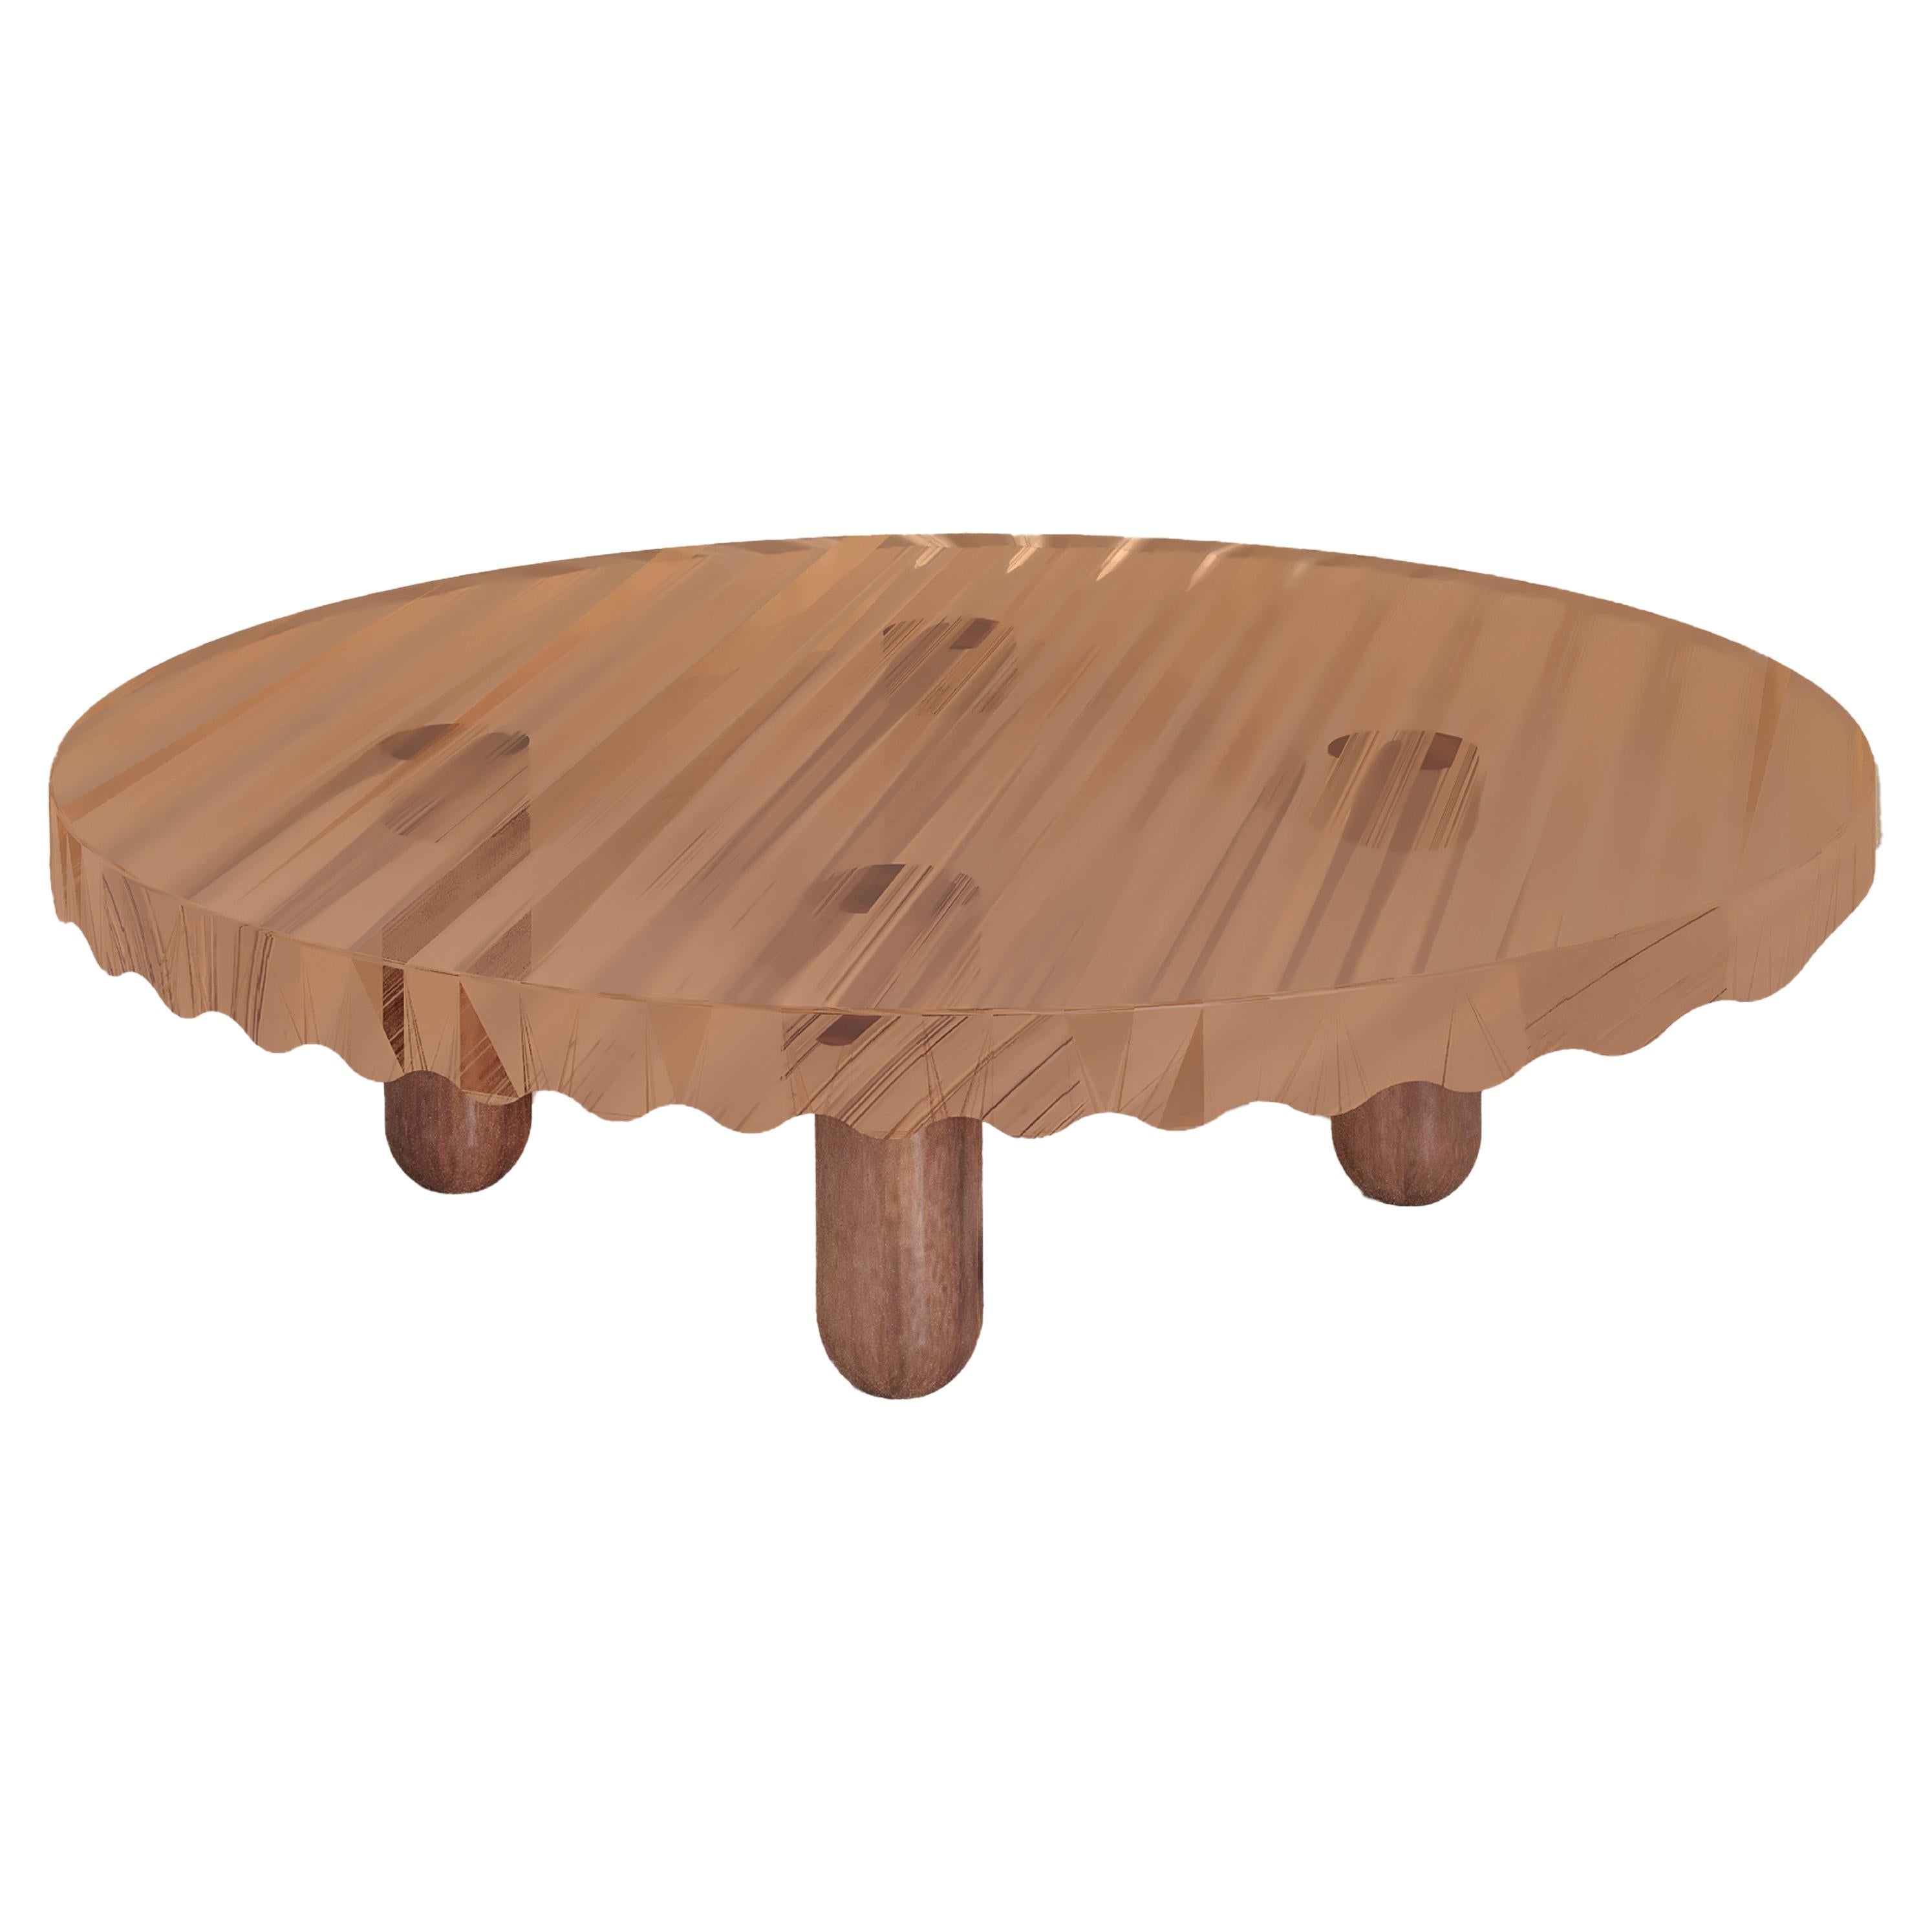 Deep Orange Epoxy Coffee Table with Solid Walnut Legs - Coffee Table NAMI For Sale